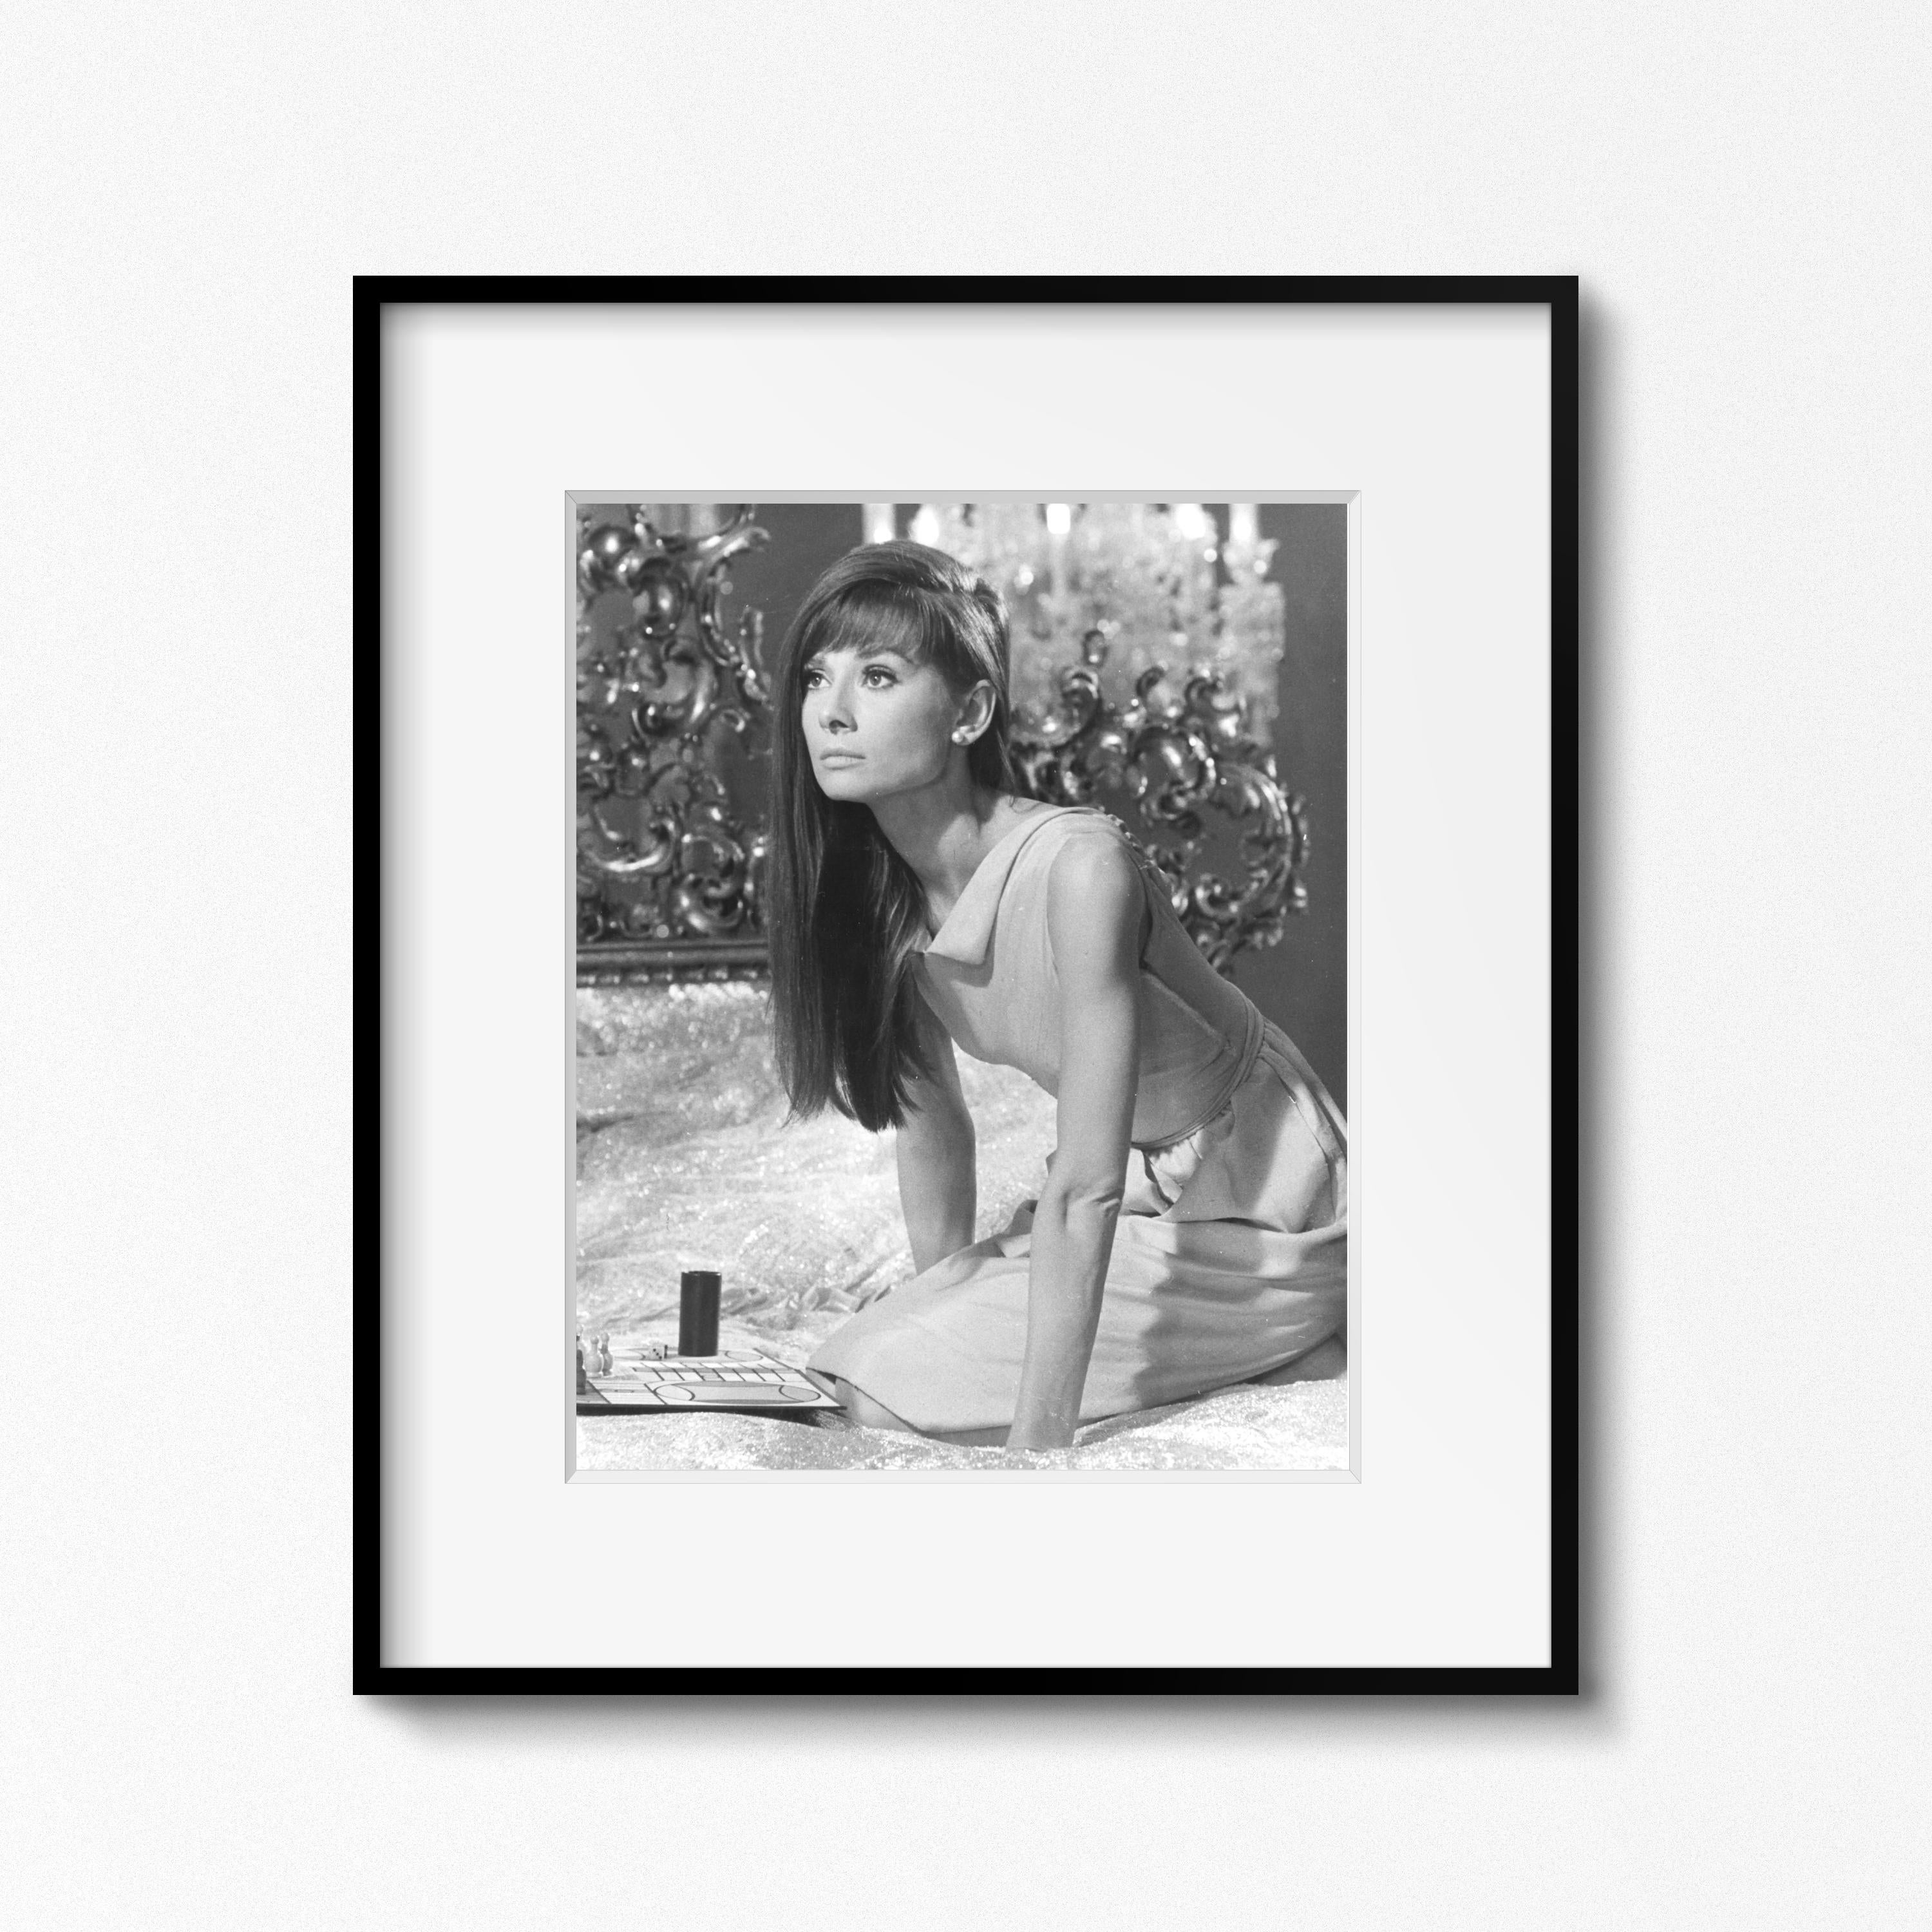 From the Personal collection of Audrey Hepburn

Audrey Hepburn on the set of 'Paris When it Sizzles,' Paris, 1962 by Vincent Rossell
Vintage gelatin silver print
Photographer's credit stamp and numerical notations verso
From the Personal